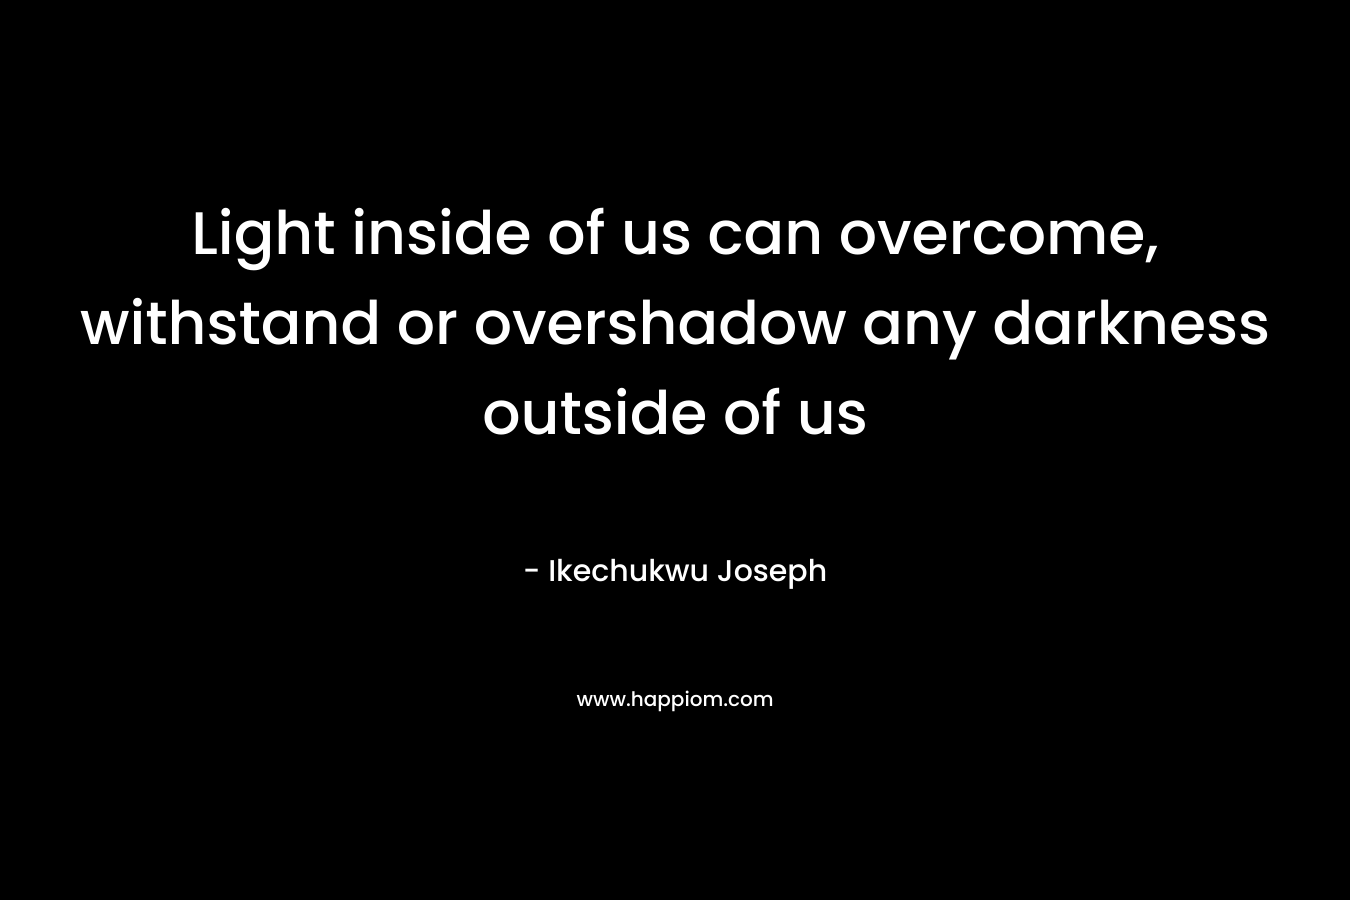 Light inside of us can overcome, withstand or overshadow any darkness outside of us – Ikechukwu Joseph